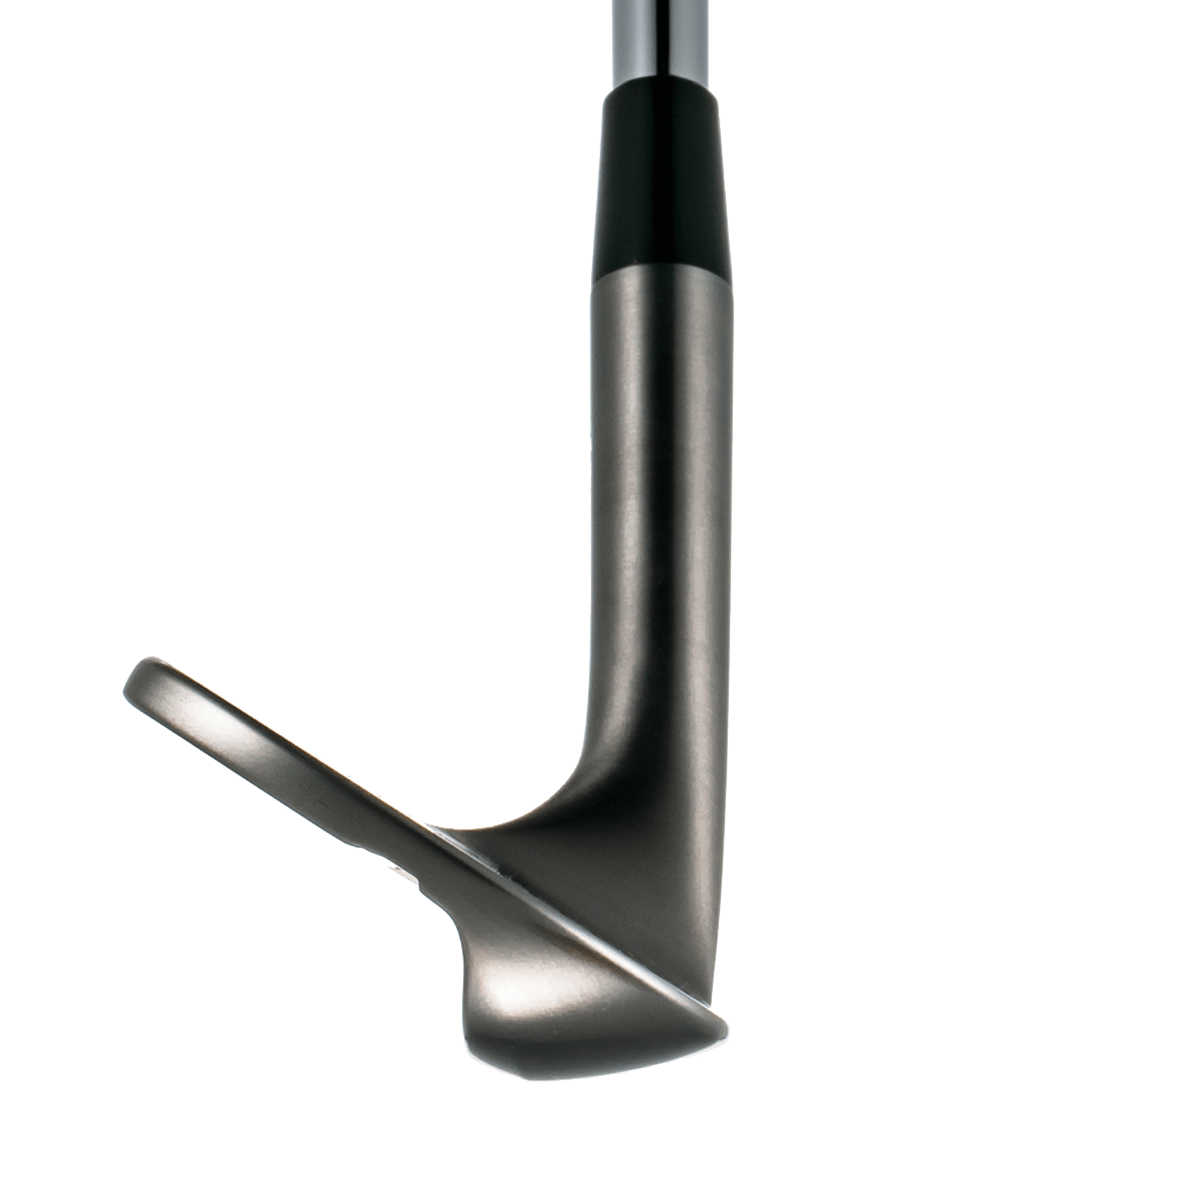 PROTOCONCEPT Golf, Forged Wedge - 33